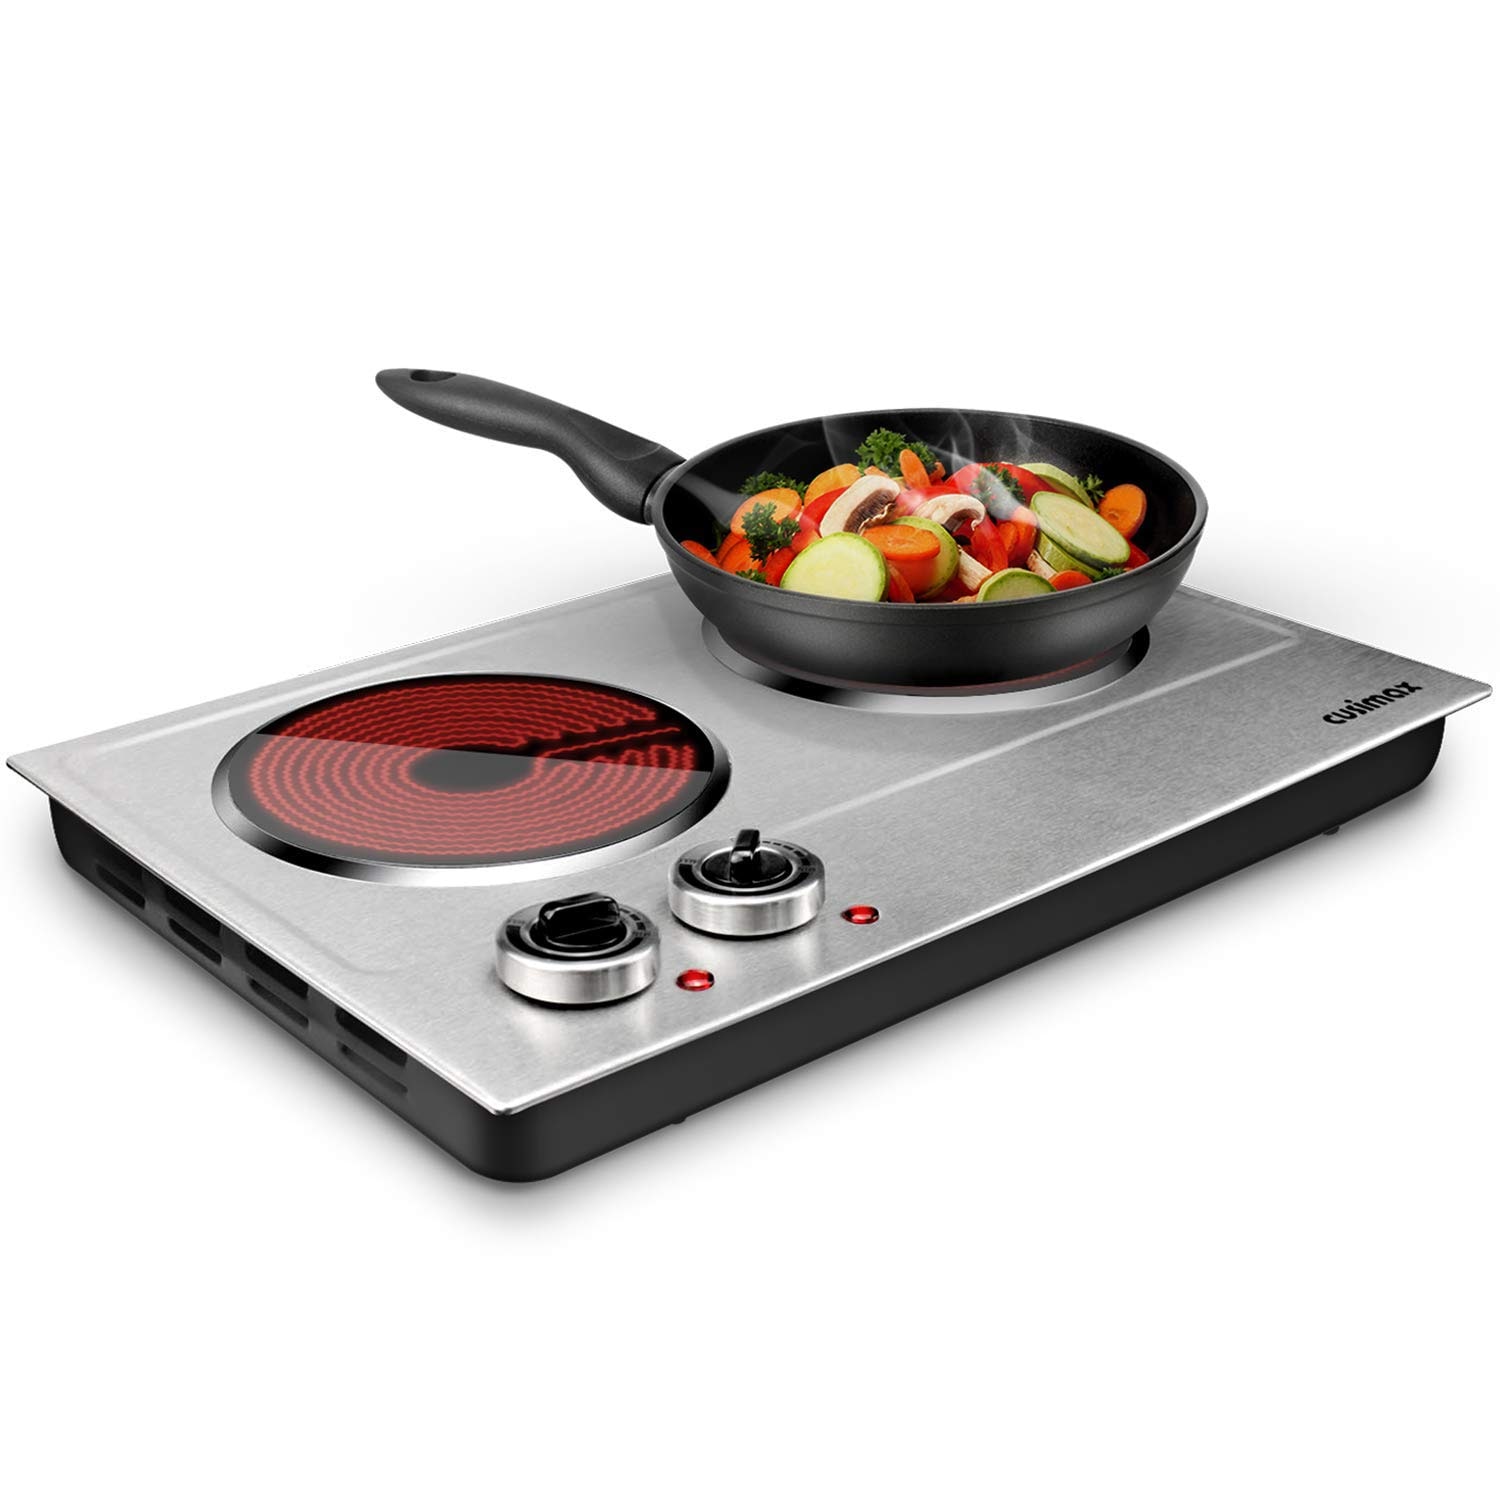 Double Burner Hot plate for Cooking - 12 Inches GCHP-12-2